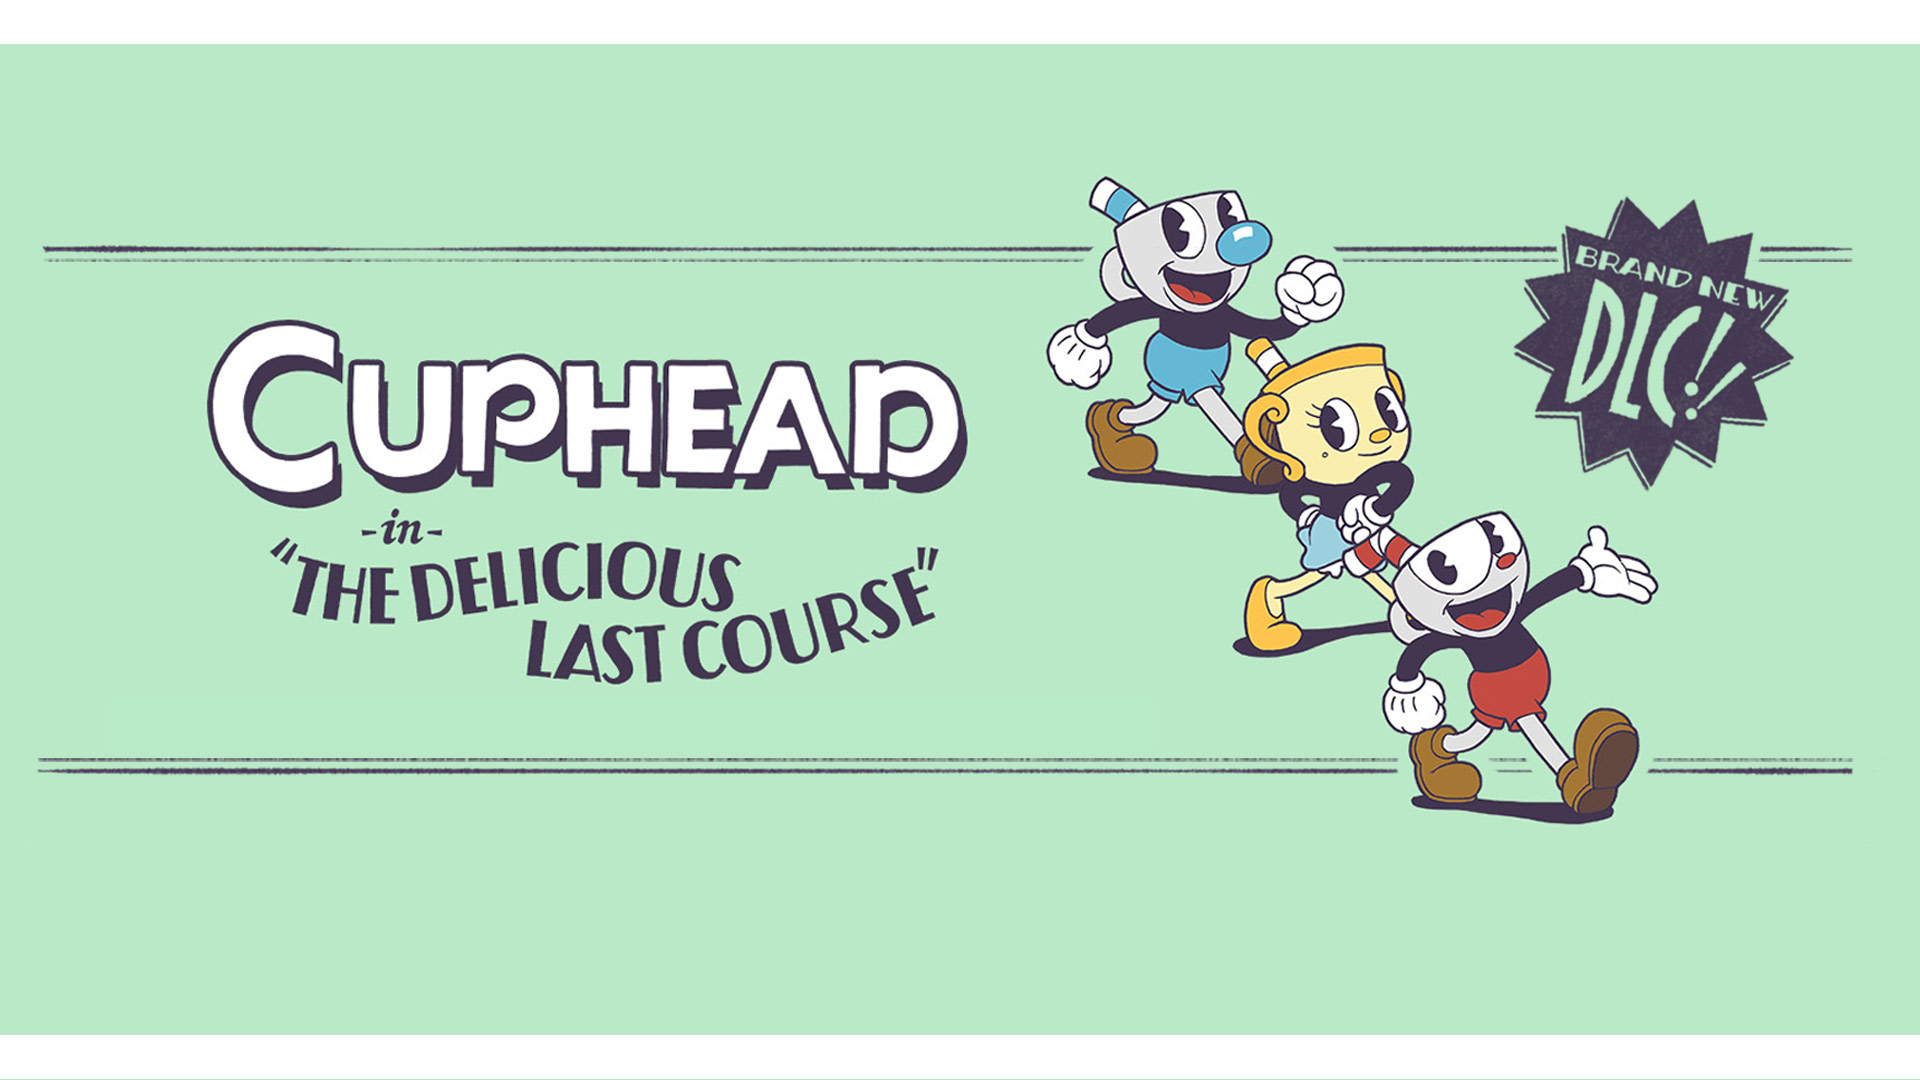 Cuphead in The delicious last course, Brand new DLC!, 3 Cuphead characters posing